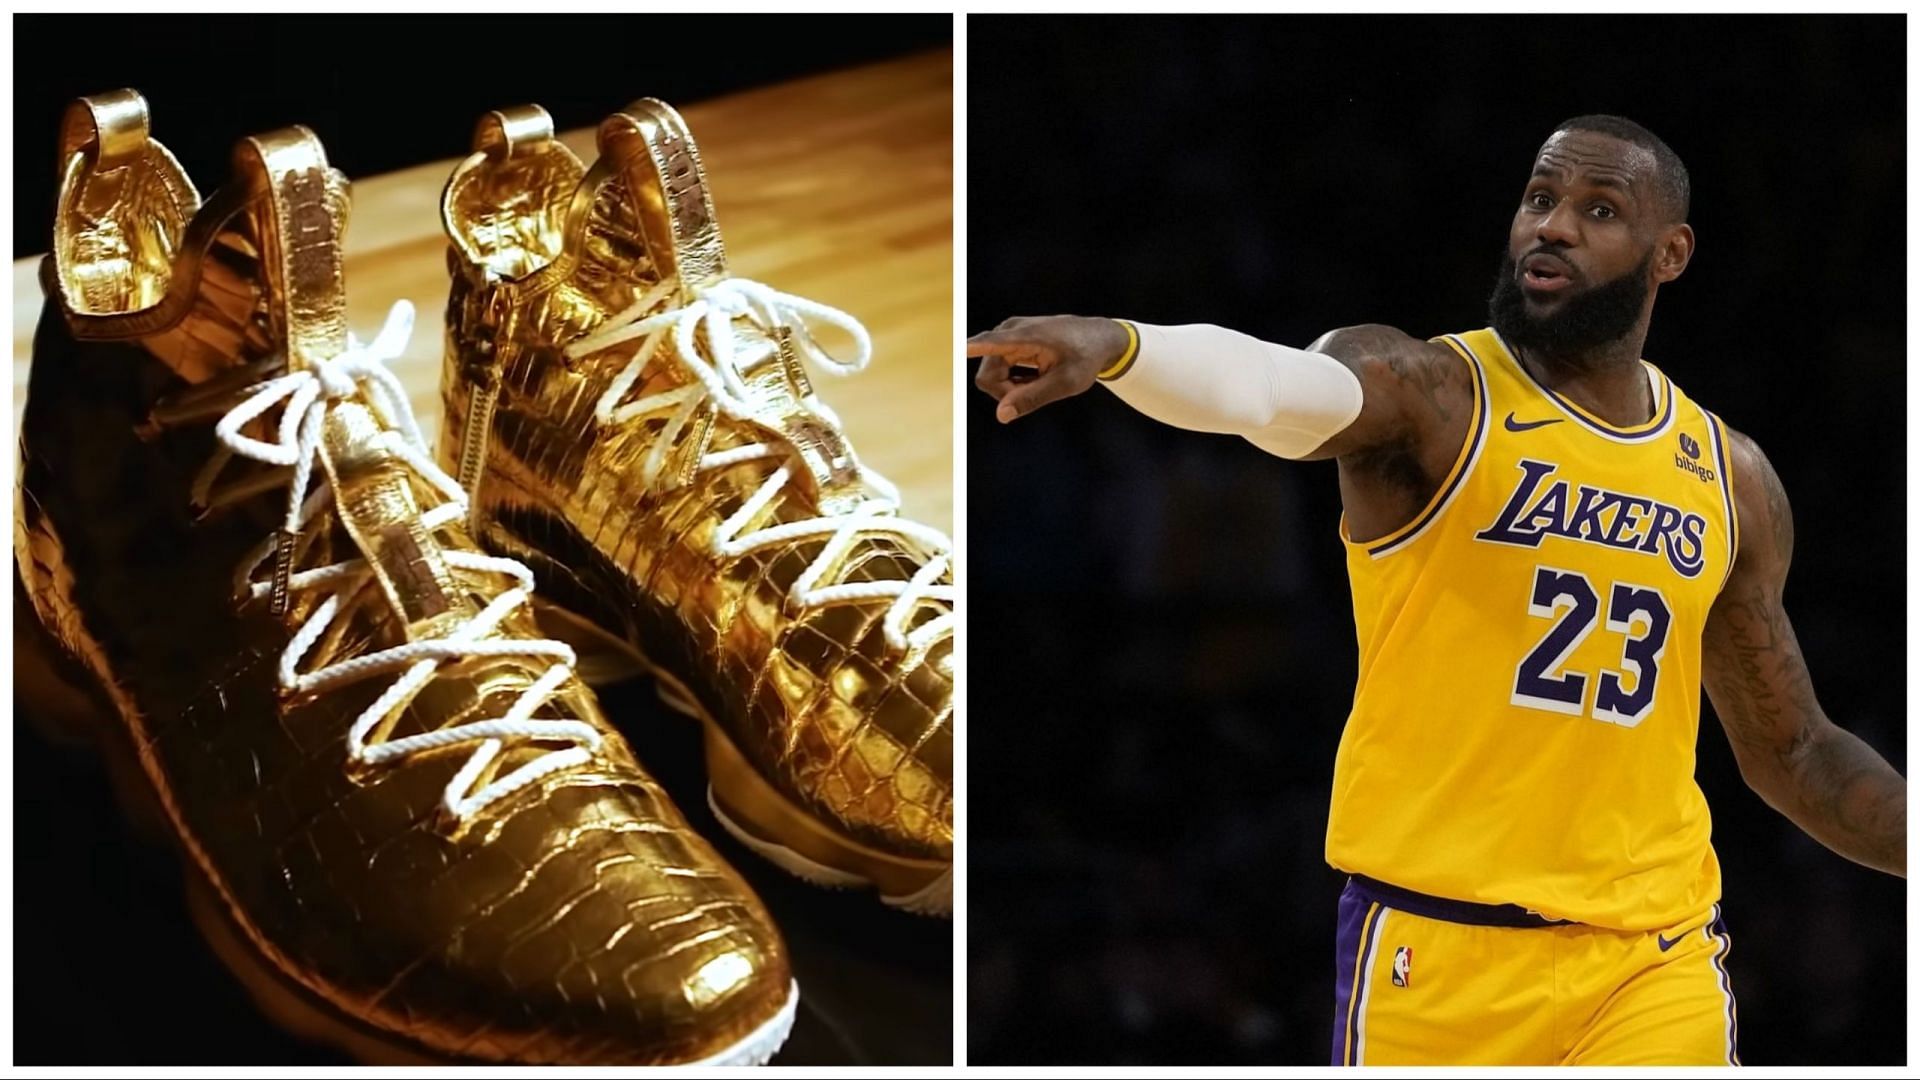 10 NBA players with the most insanely expensive sneakers